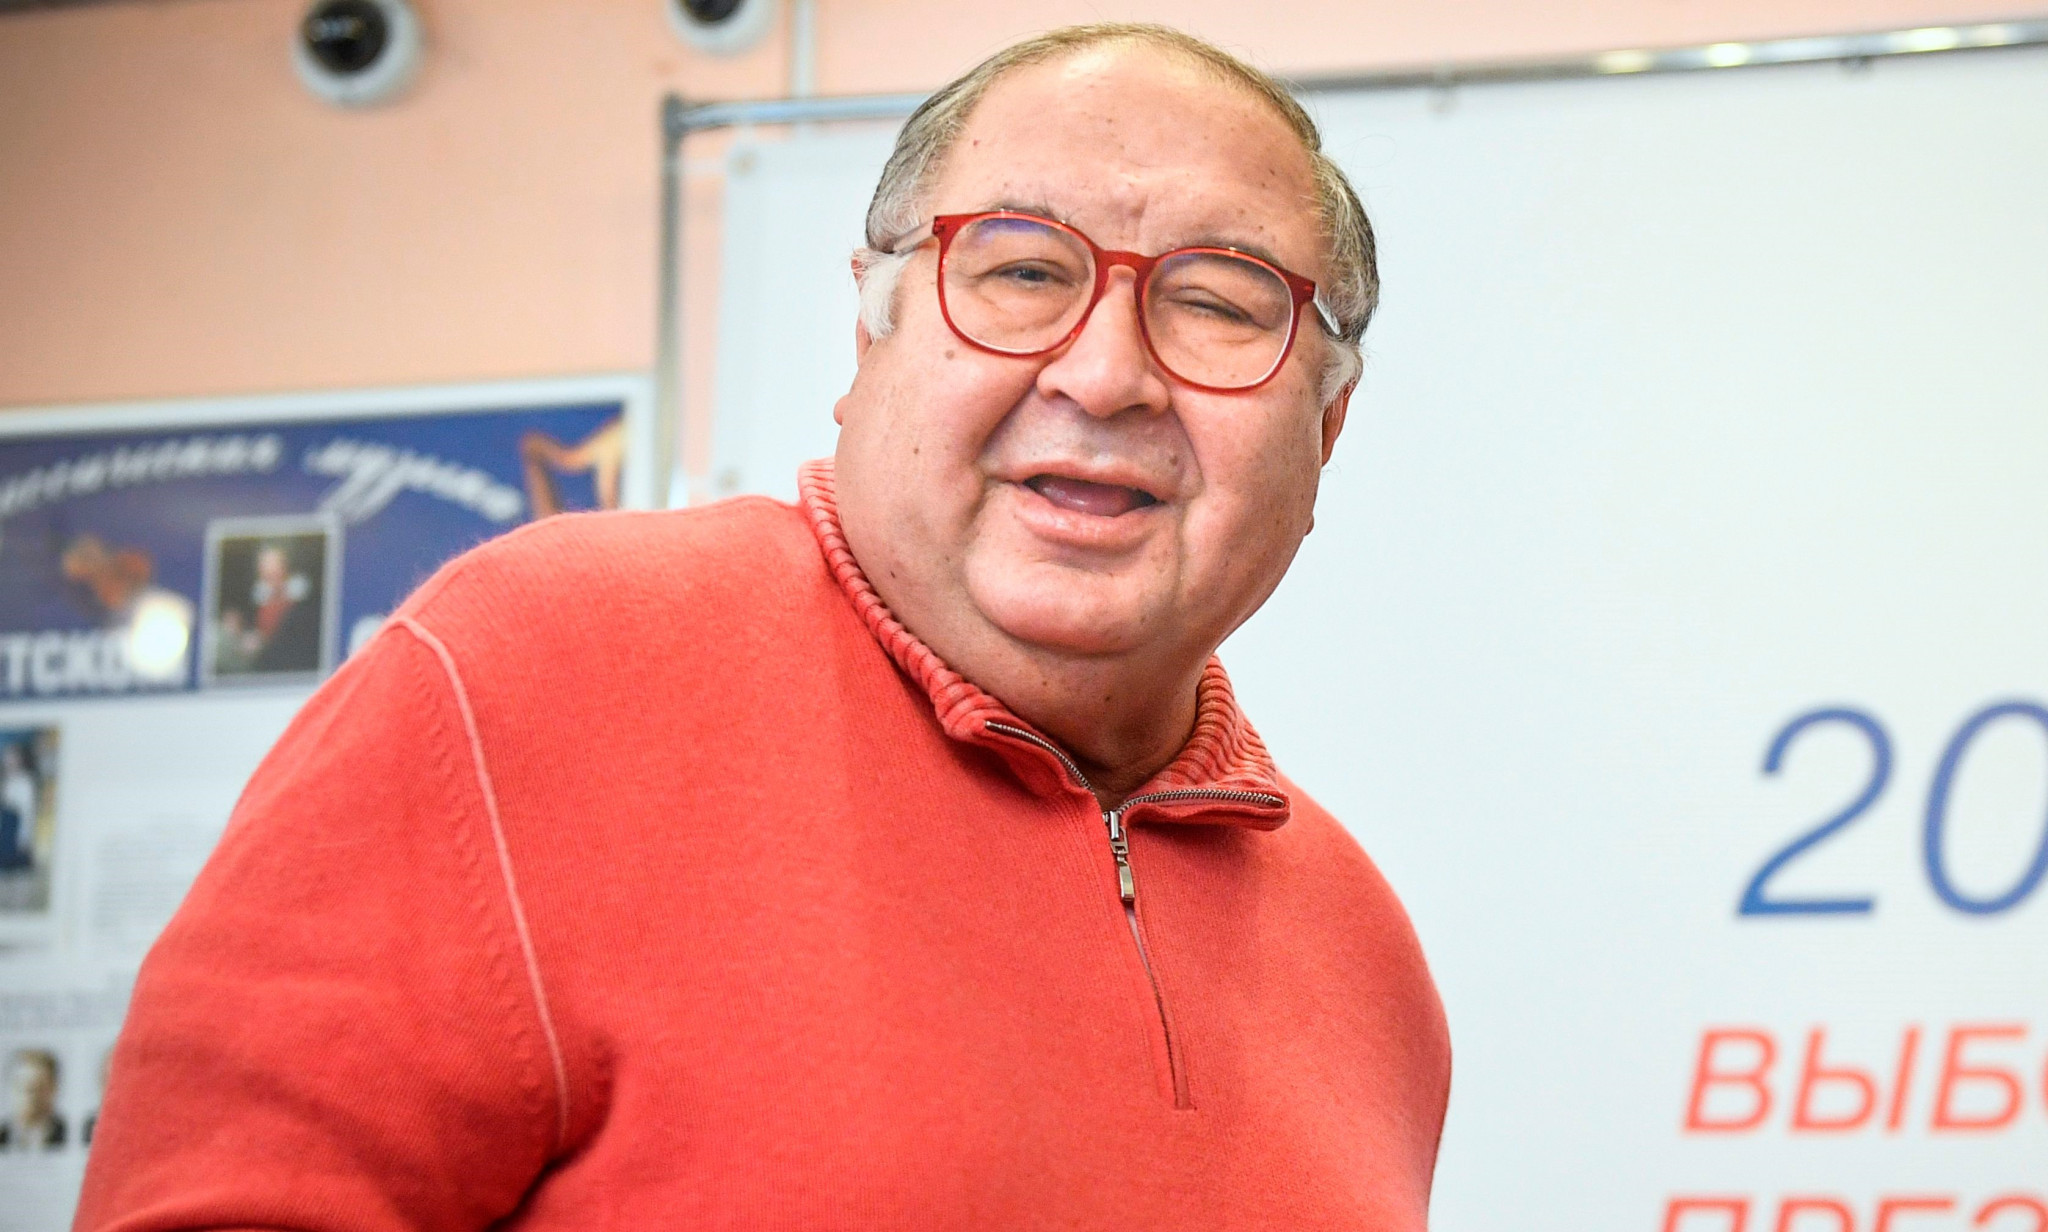 Alisher Usmanov stood aside as FIE President following the imposition of European Union sanctions in which he was described as a  